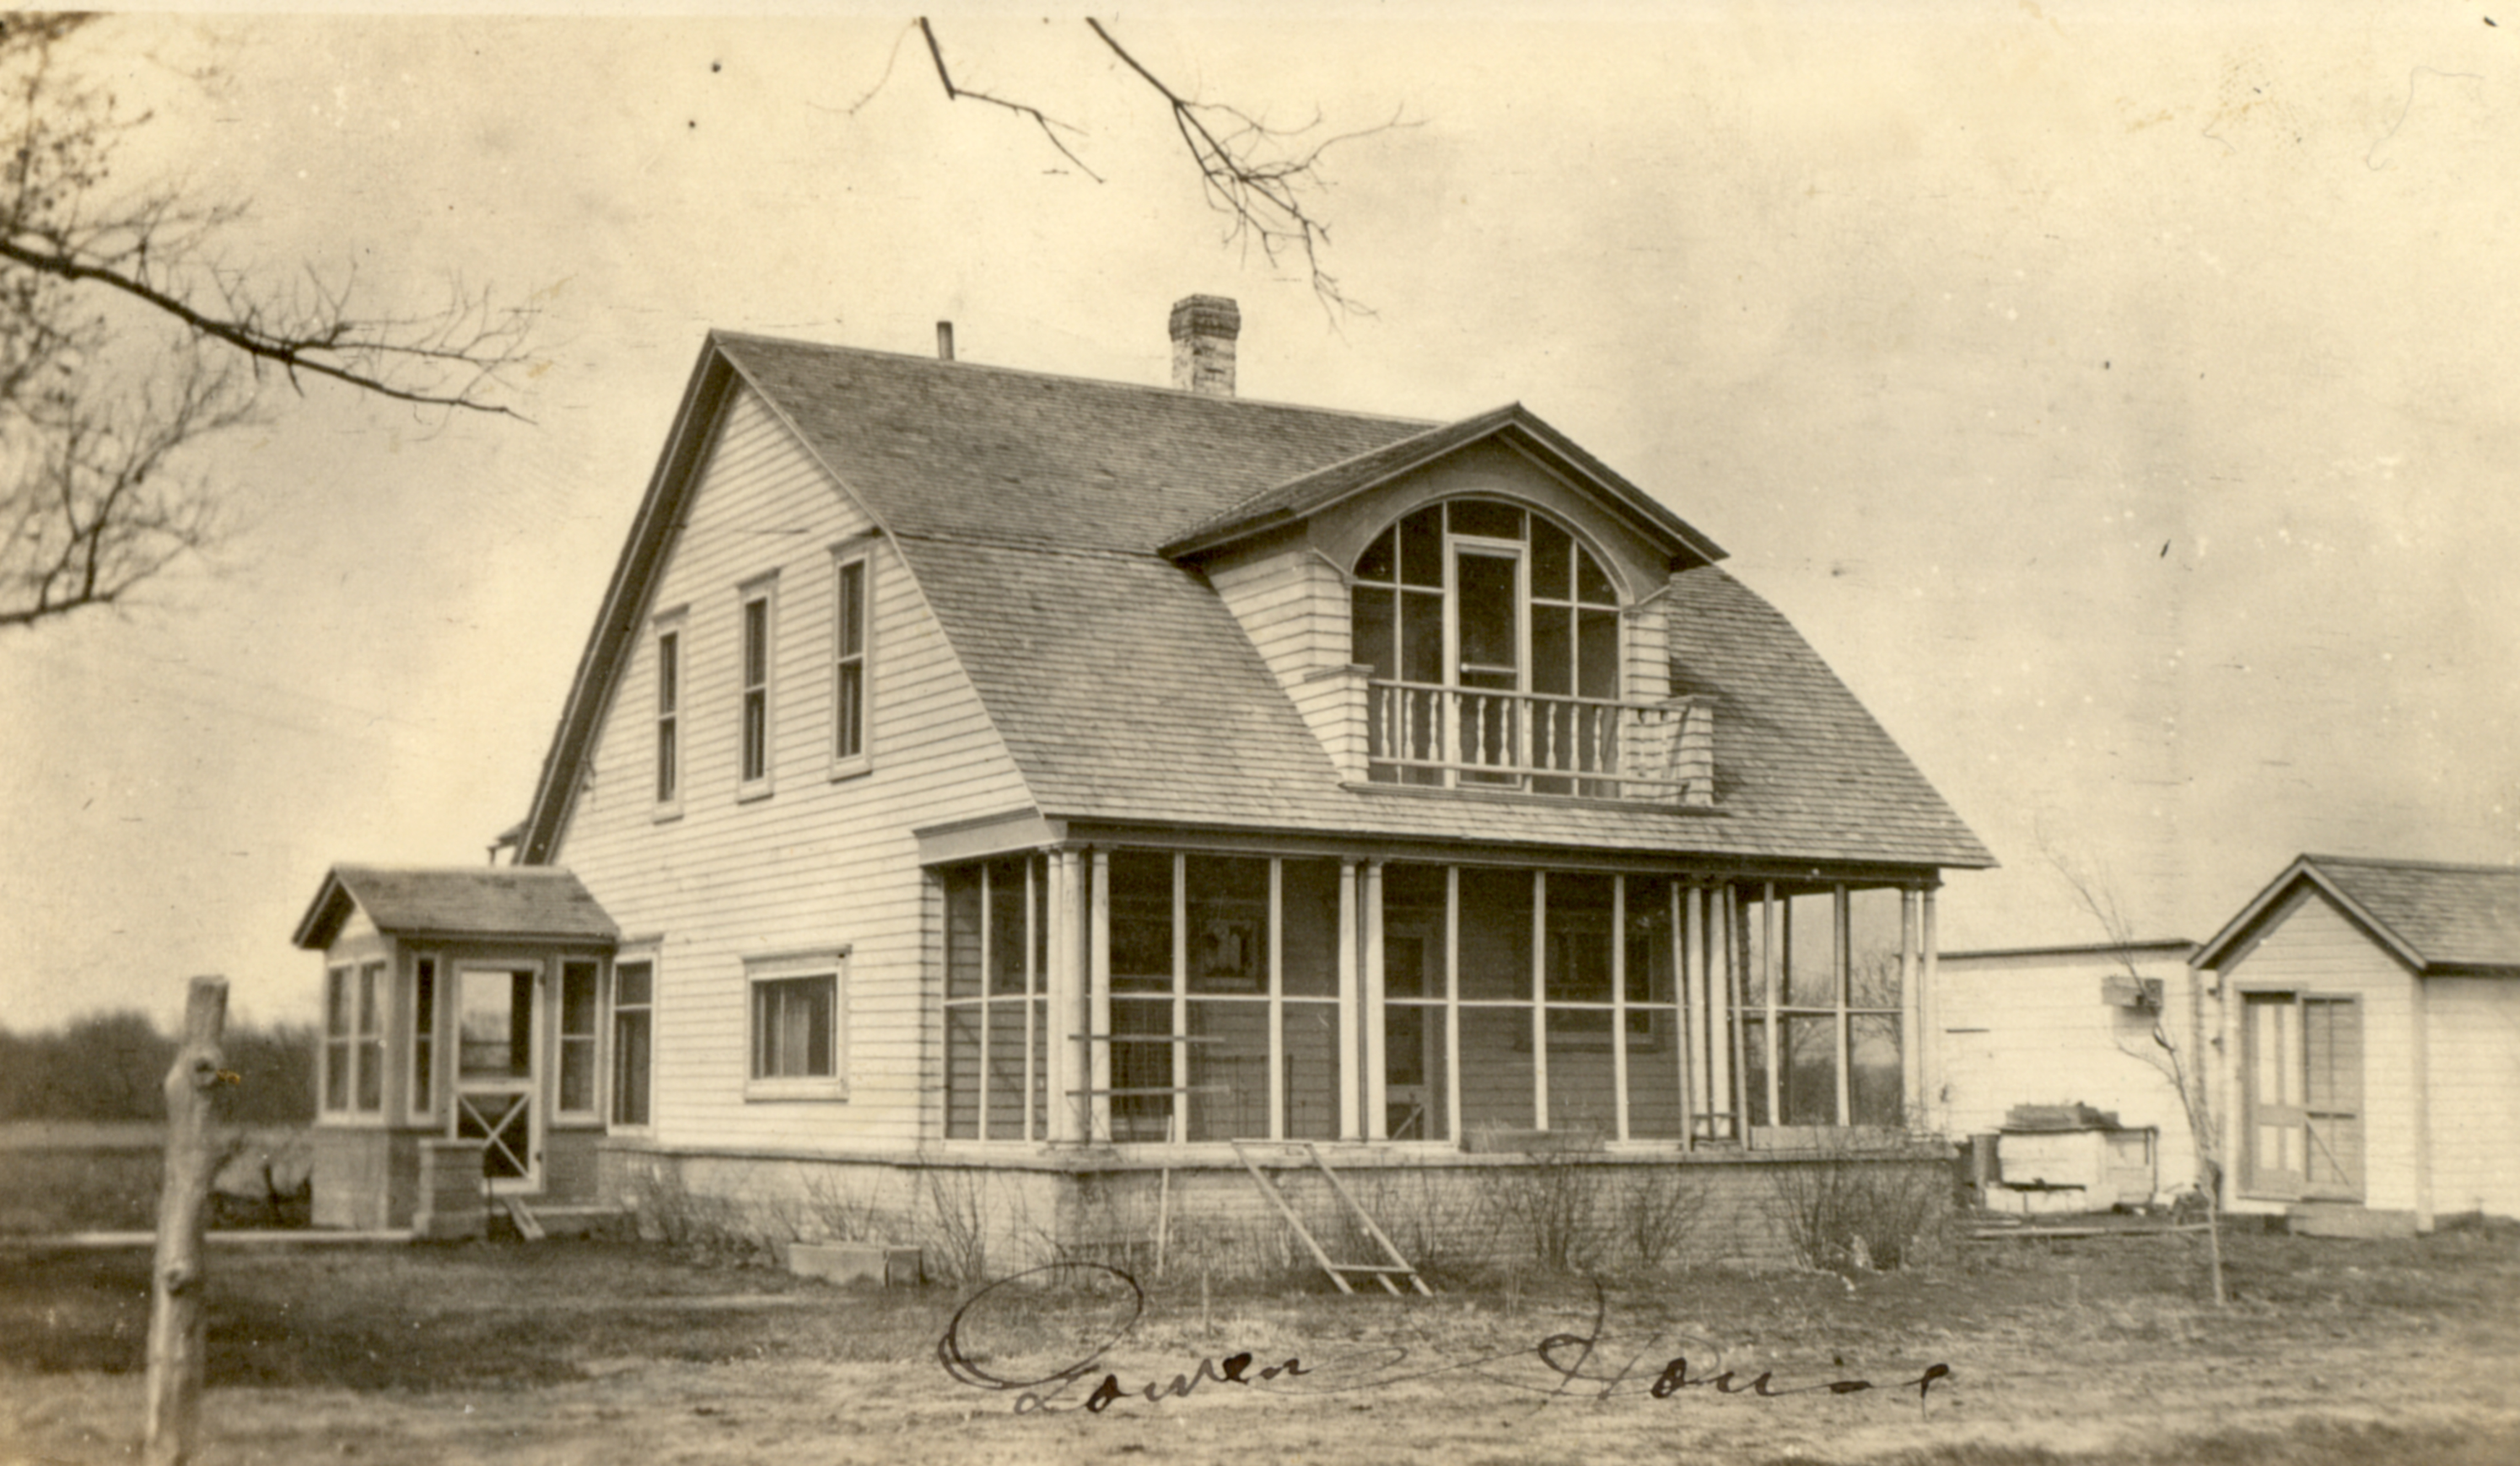 The William Gowen house in northeast North Loup. 1916.